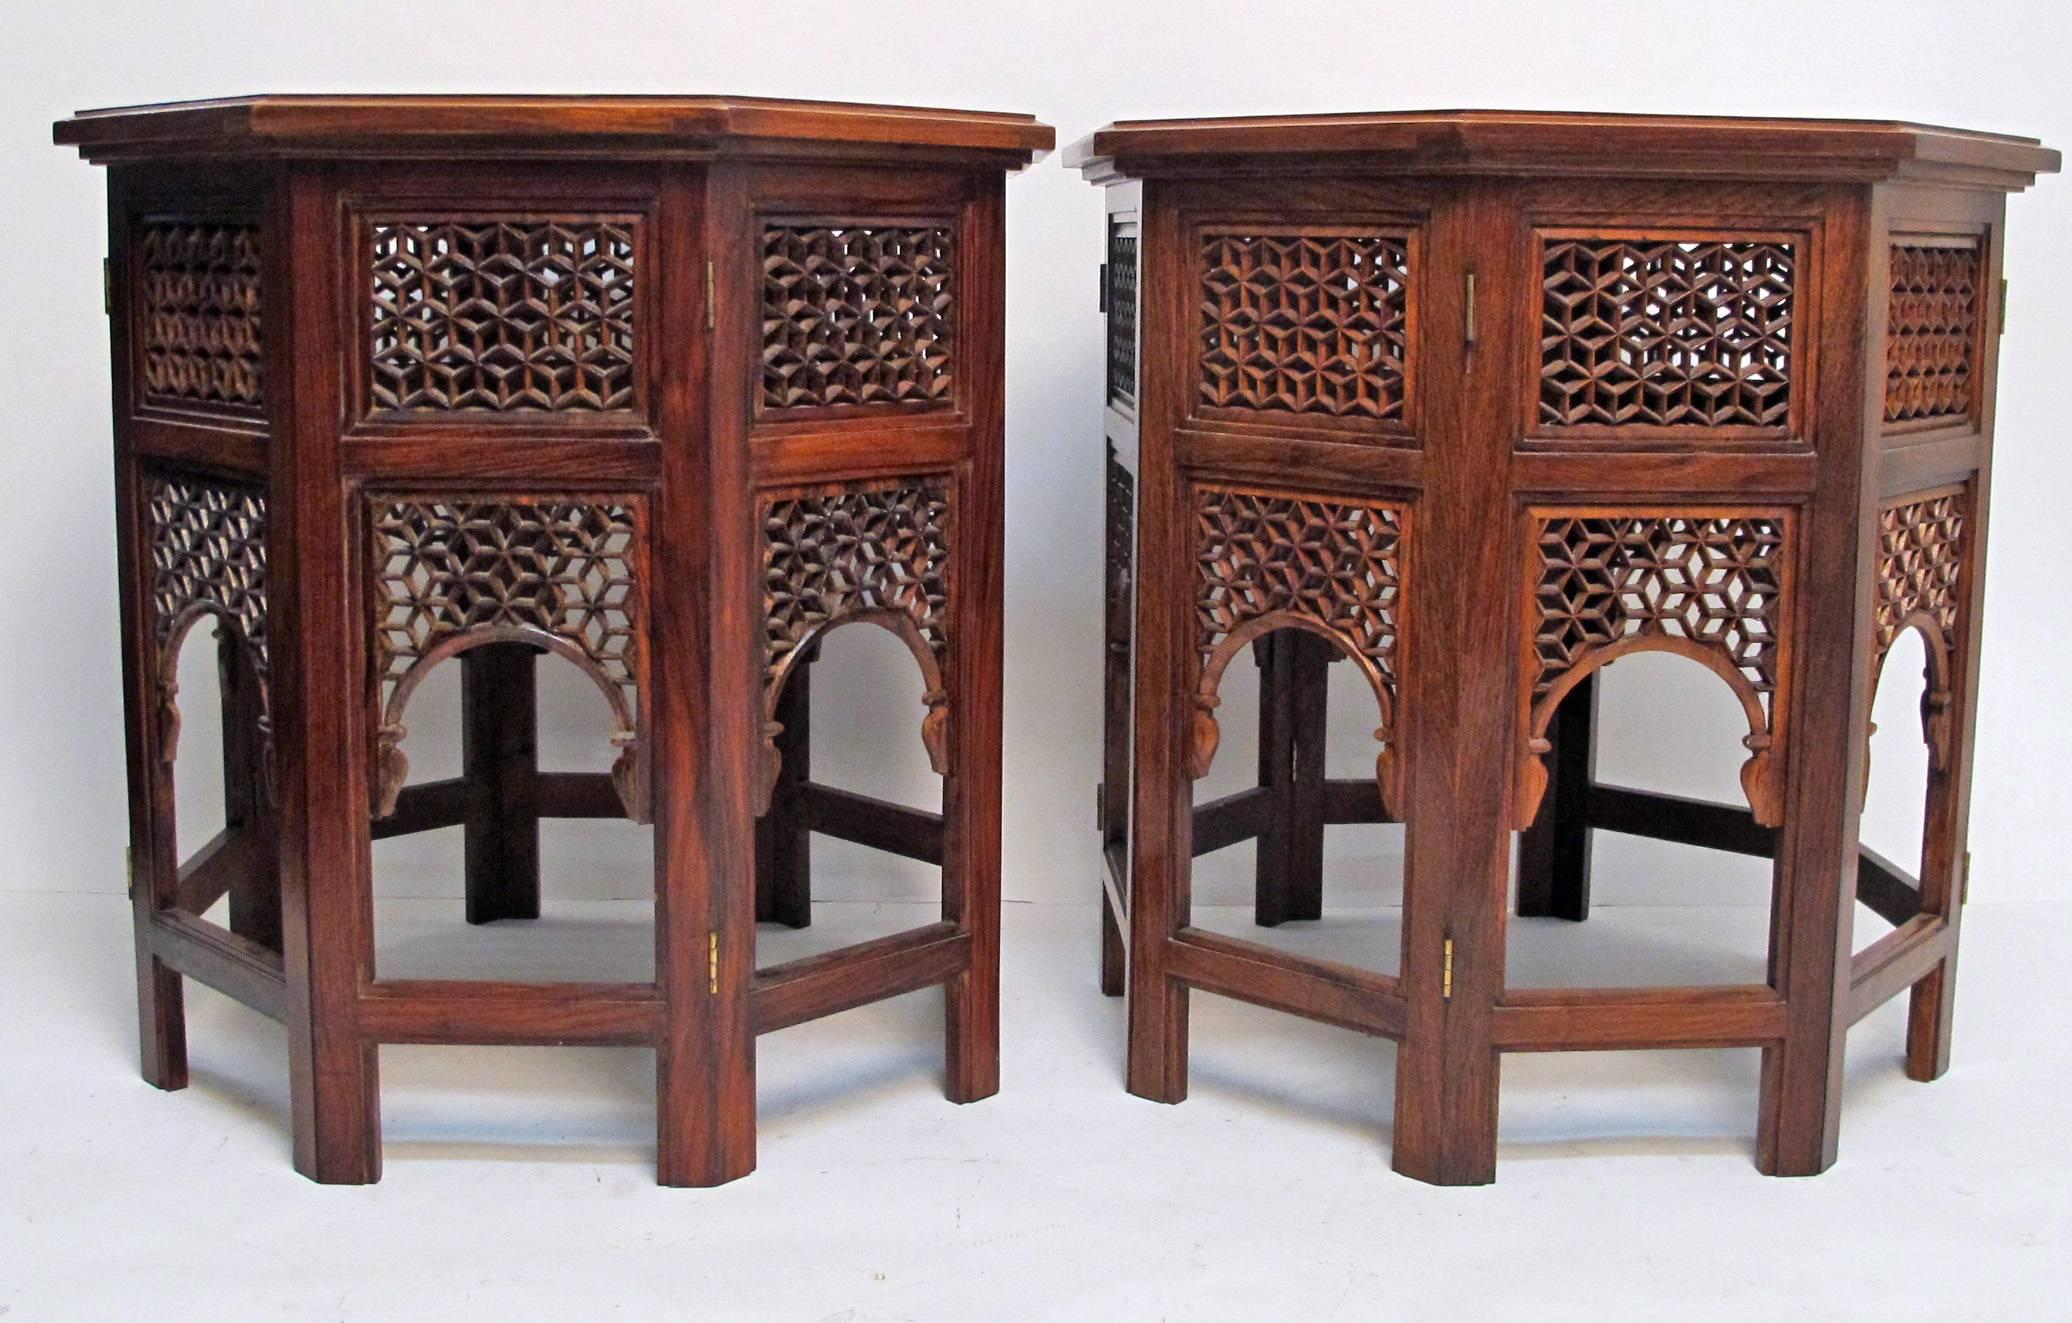 A pair of lattice work octagonal shaped side tables with brass inlay and glass covered lattice top. India, circa 1900.